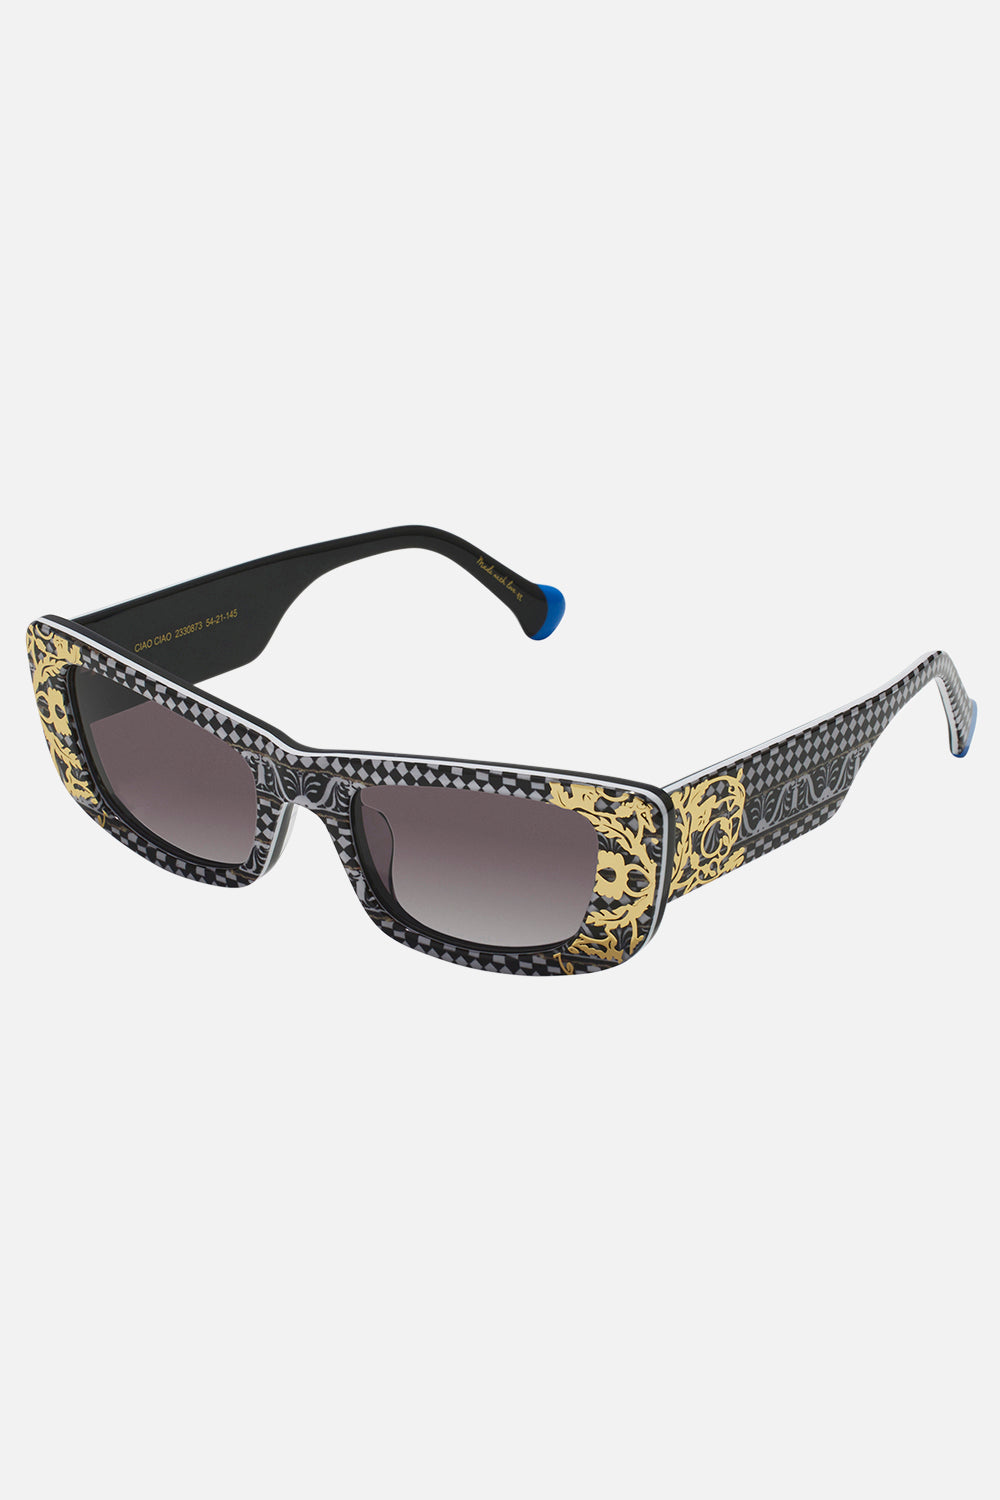 Product view of CAMILLA designer sunglasses in Look Up Tesoro print frame